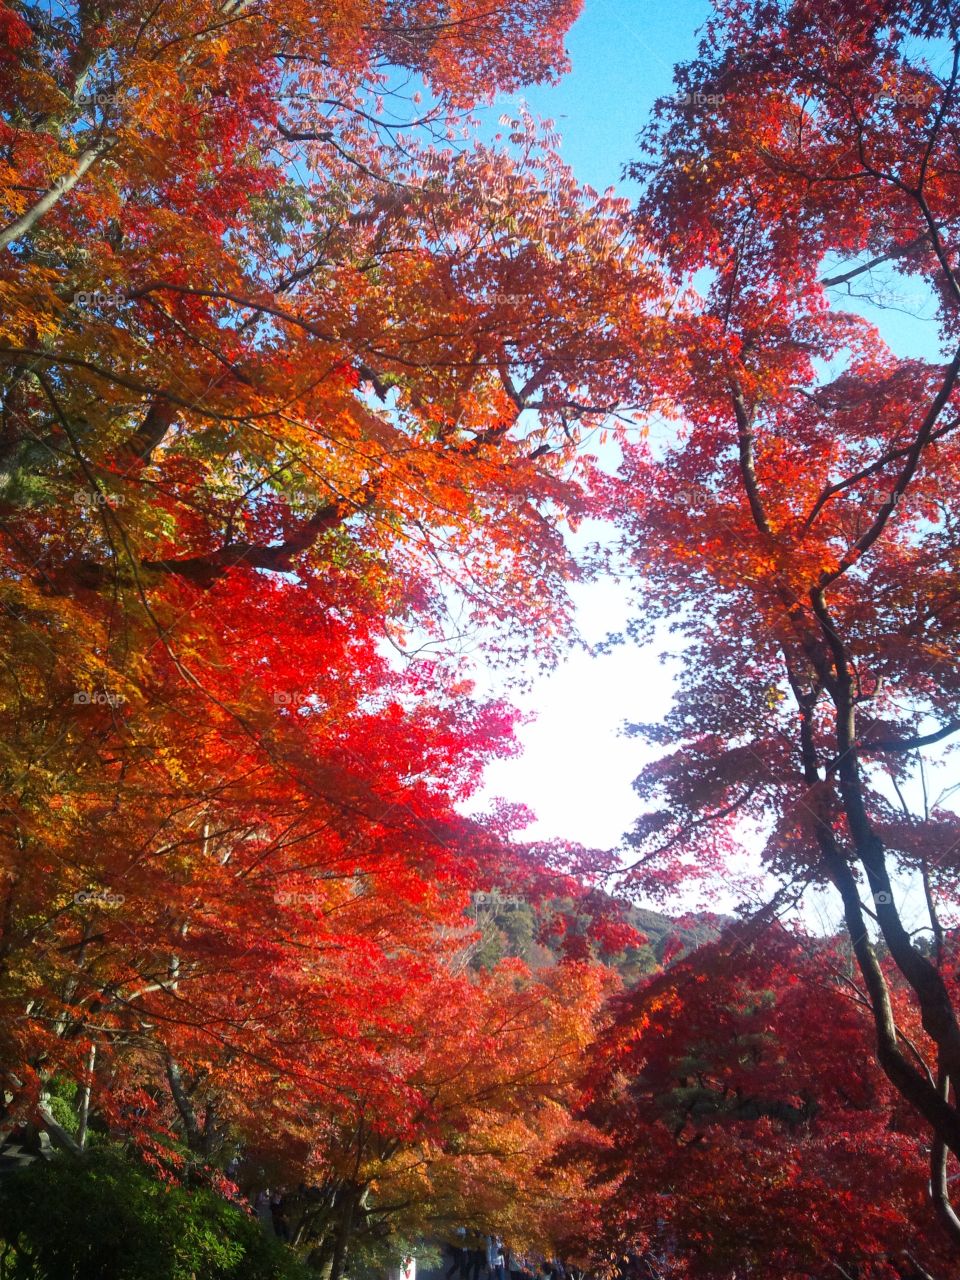 favorite autumn!
autumn always give us brightness because of the color Red! 
we always thank the nature in autumn before the dark winter. 
i took this beautiful leaves in Kyoto, Japan!
sometimes we enjoy the contrast of colors, Red, Yellow and Green. 
nowhere has like this beautiful nature except Japan.